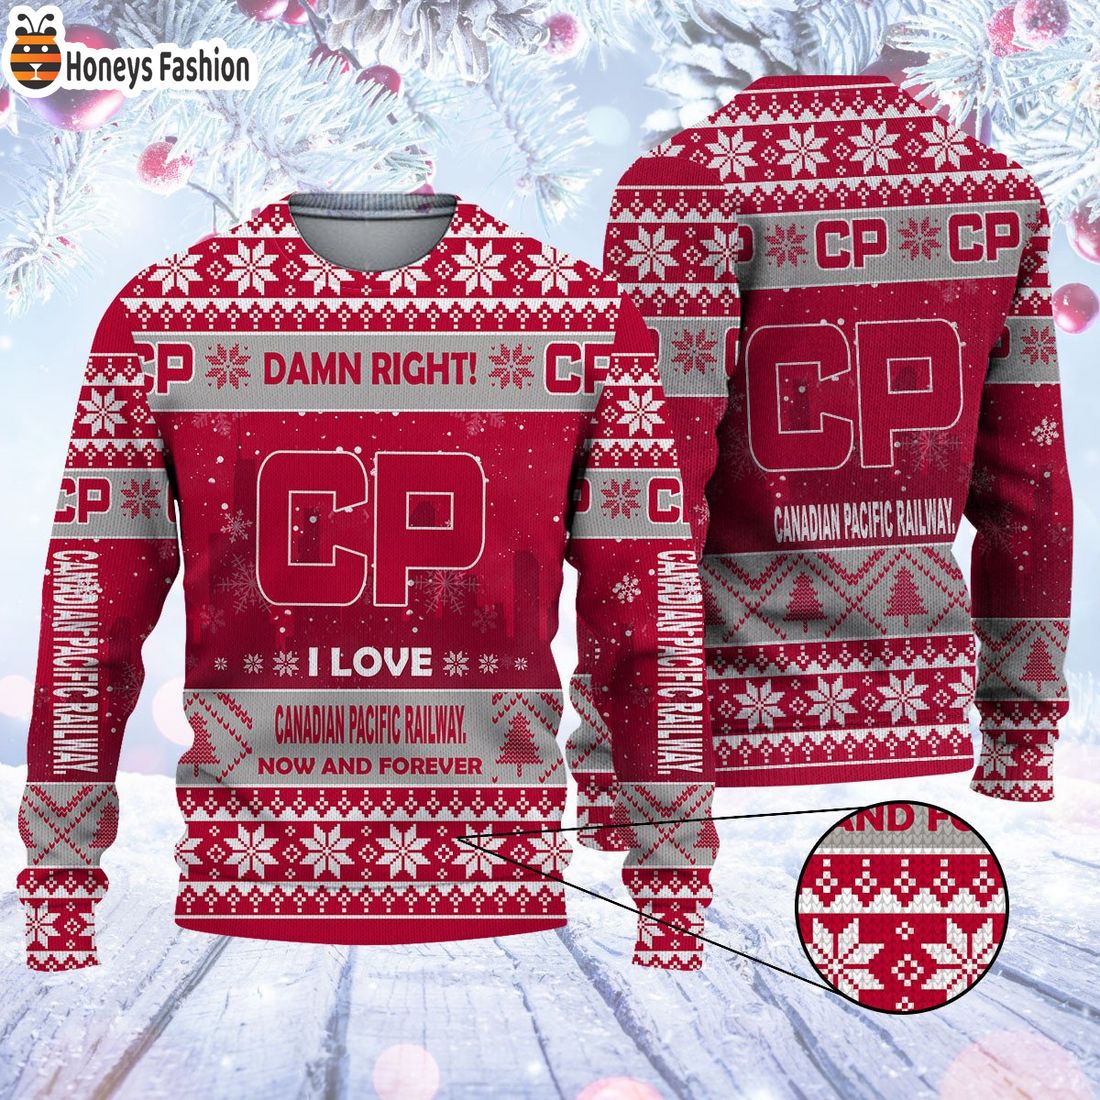 Damn right Canadian Pacific Railway now and forever ugly christmas sweater